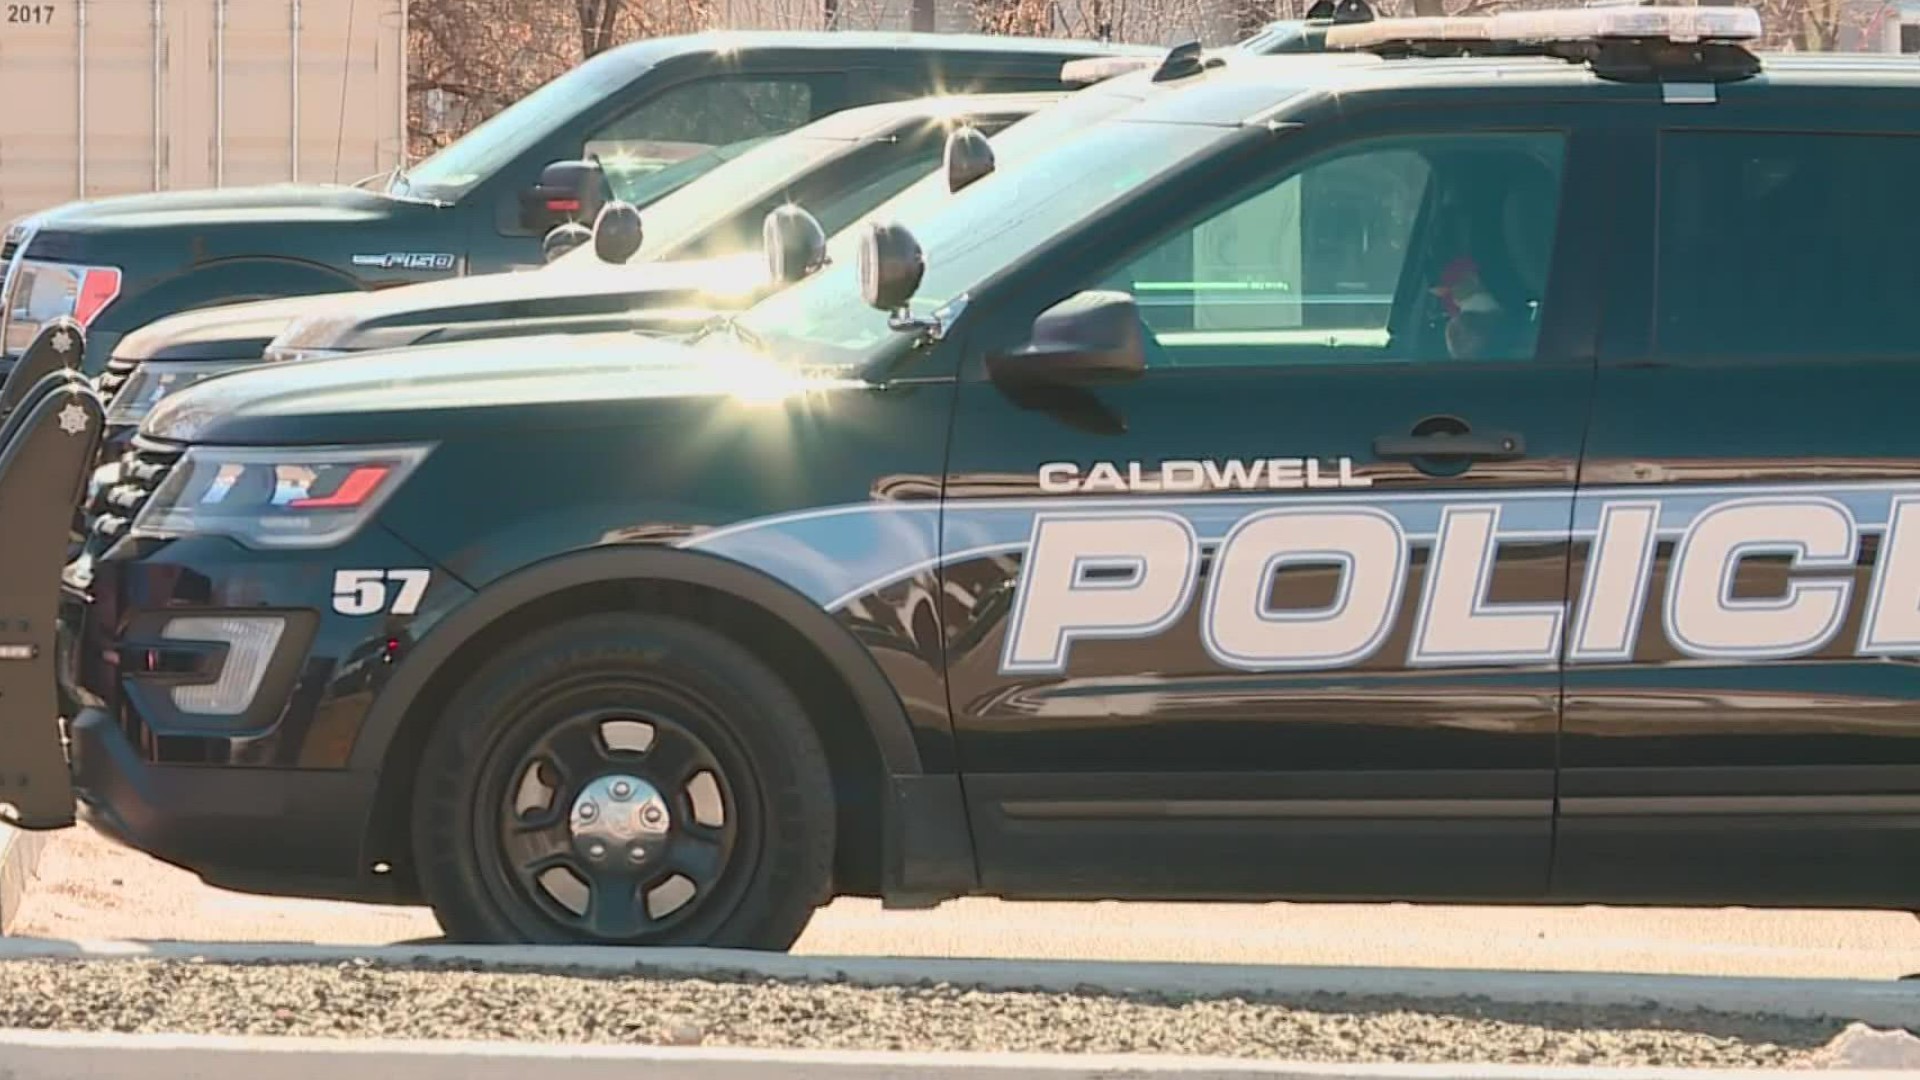 “This is a tragic situation for the family and the officers involved. My thoughts go out to them during this difficult time,” Caldwell Police Chief, Rex Ingram said.